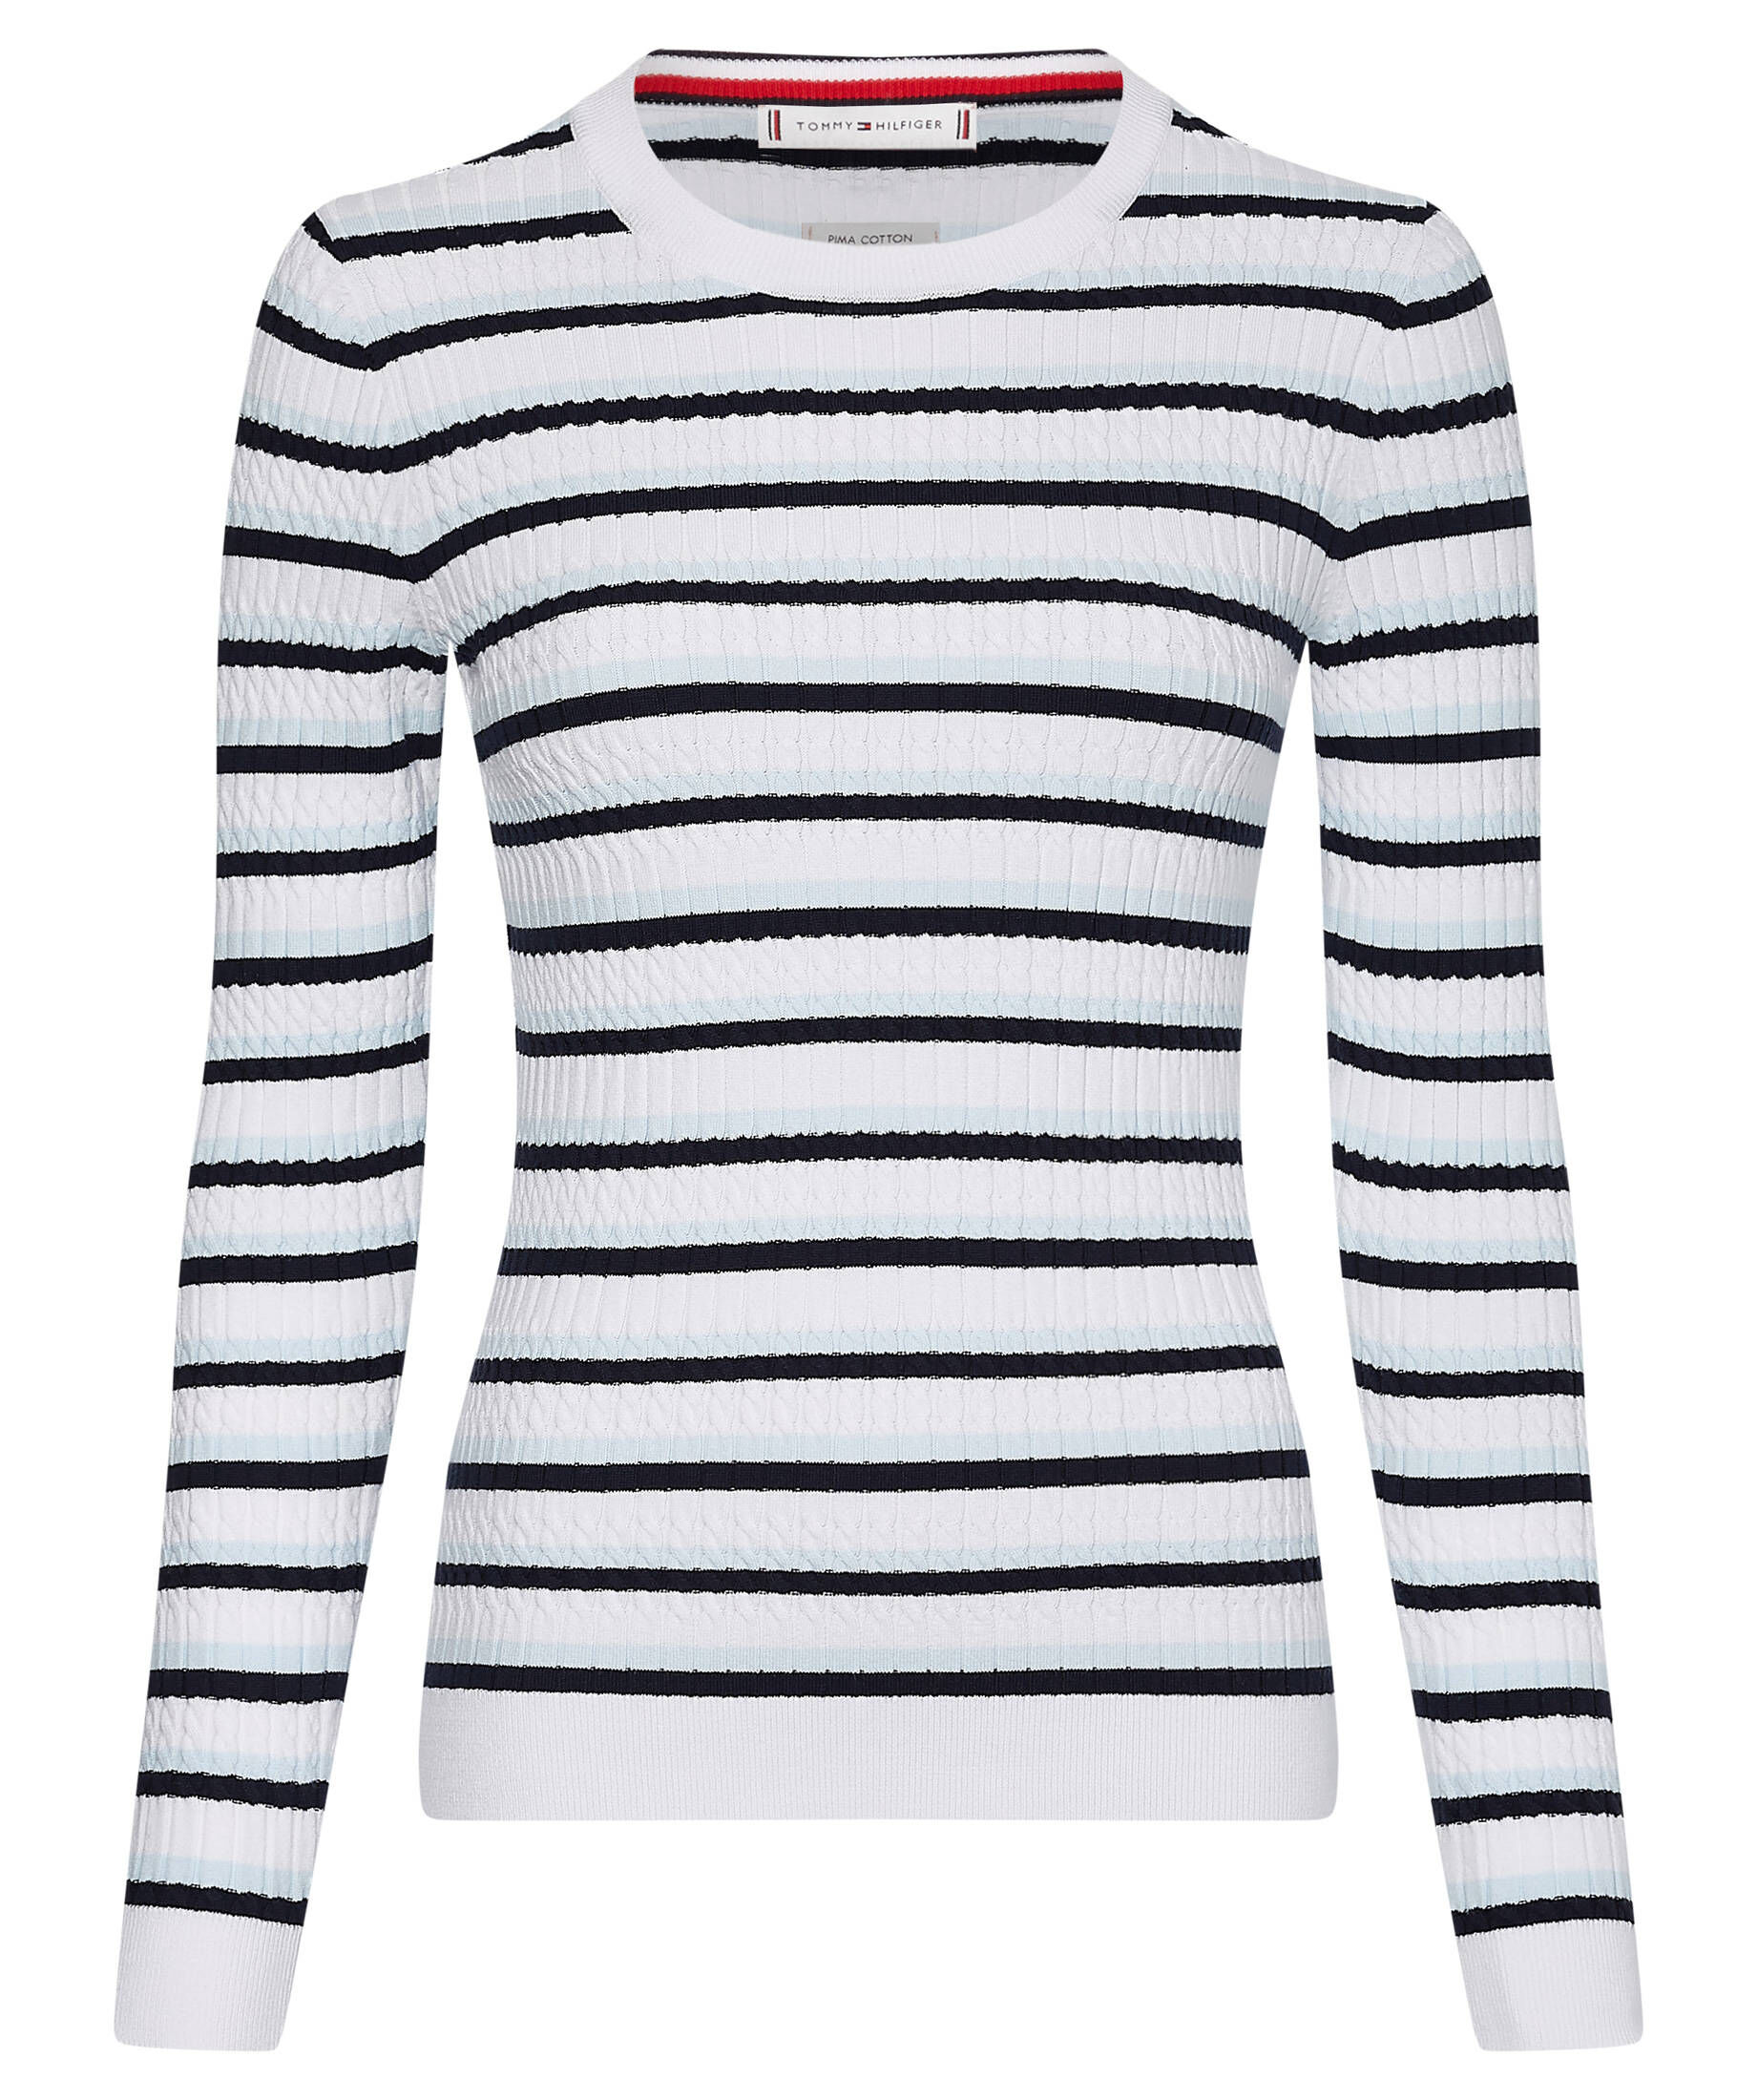 pink Pullover TOMMY HILFIGER 38 Pullover Tommy Hilfiger Damen Damen Kleidung Tommy Hilfiger Damen Pullover & Strickkleidung Tommy Hilfiger Damen Pullover Tommy Hilfiger Damen M, T2 